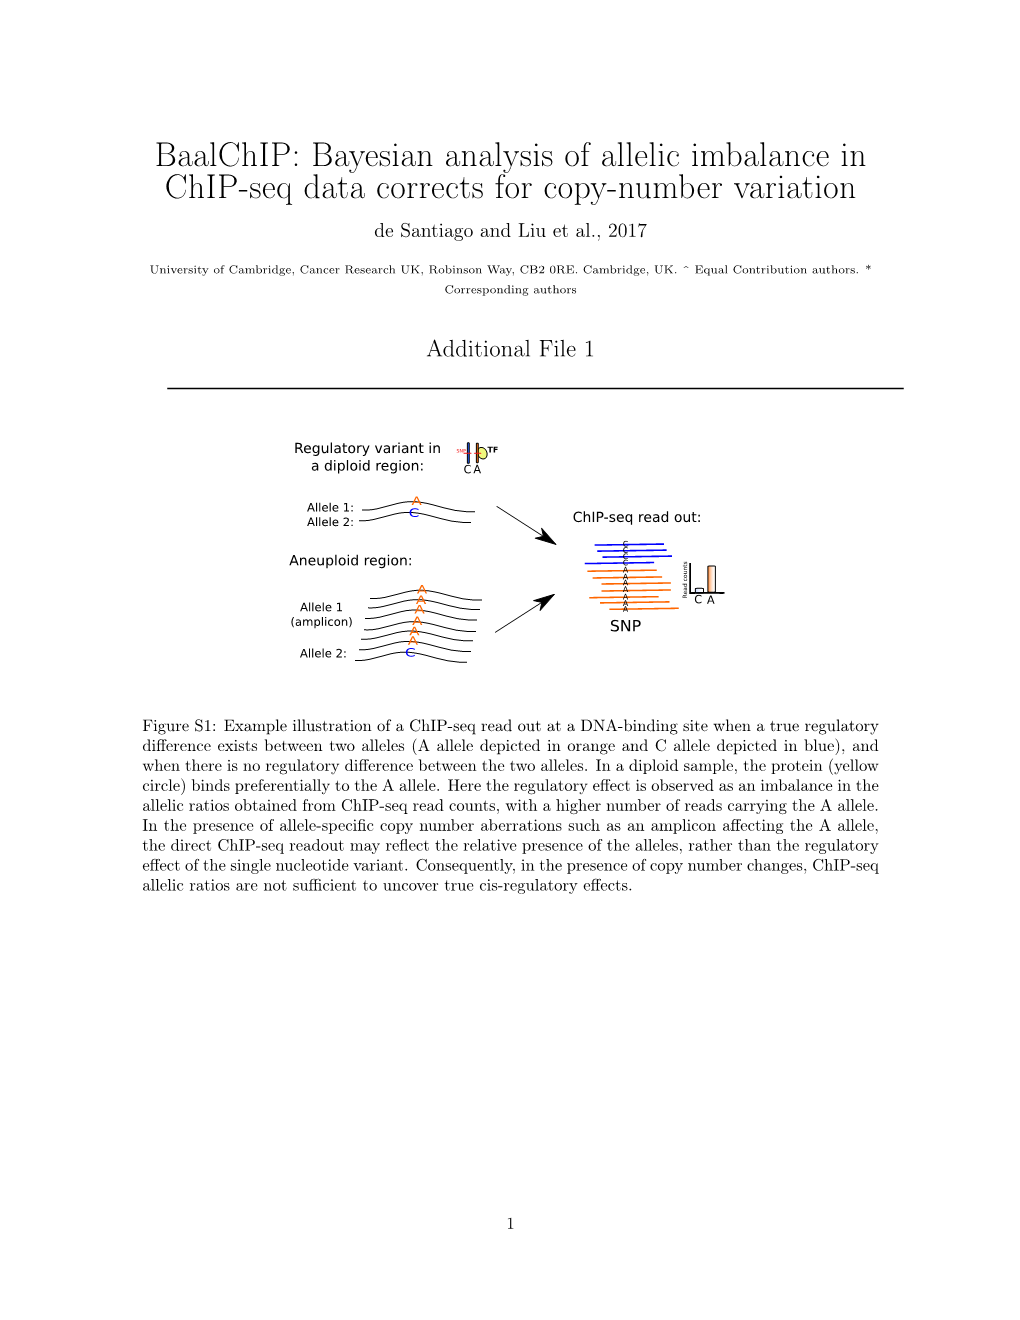 Bayesian Analysis of Allelic Imbalance in Chip-Seq Data Corrects for Copy-Number Variation De Santiago and Liu Et Al., 2017